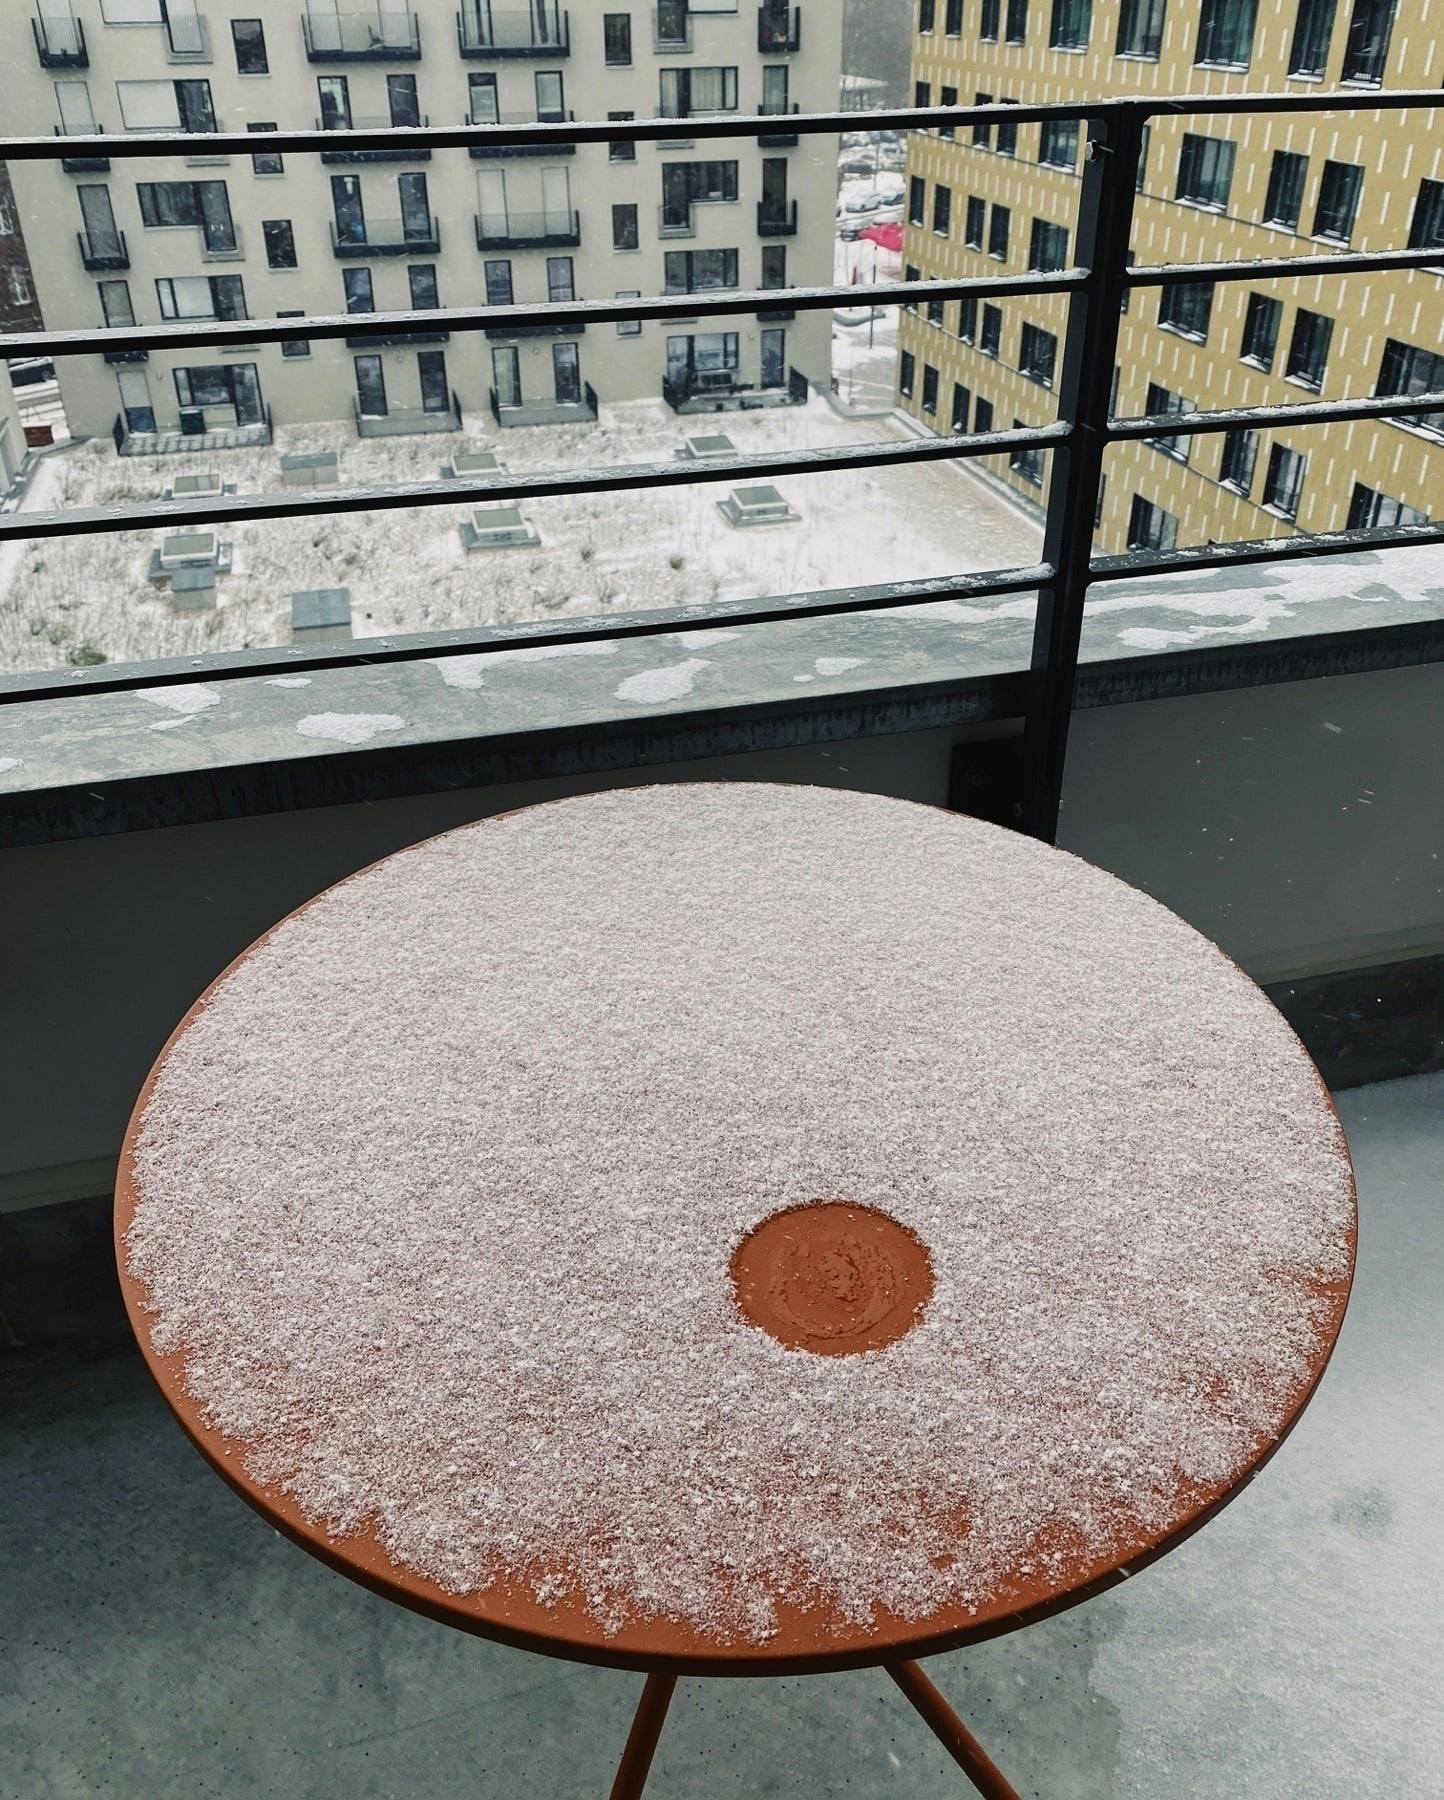 a table in a balcony covered in snow, some snow is melted making an empty circular shape